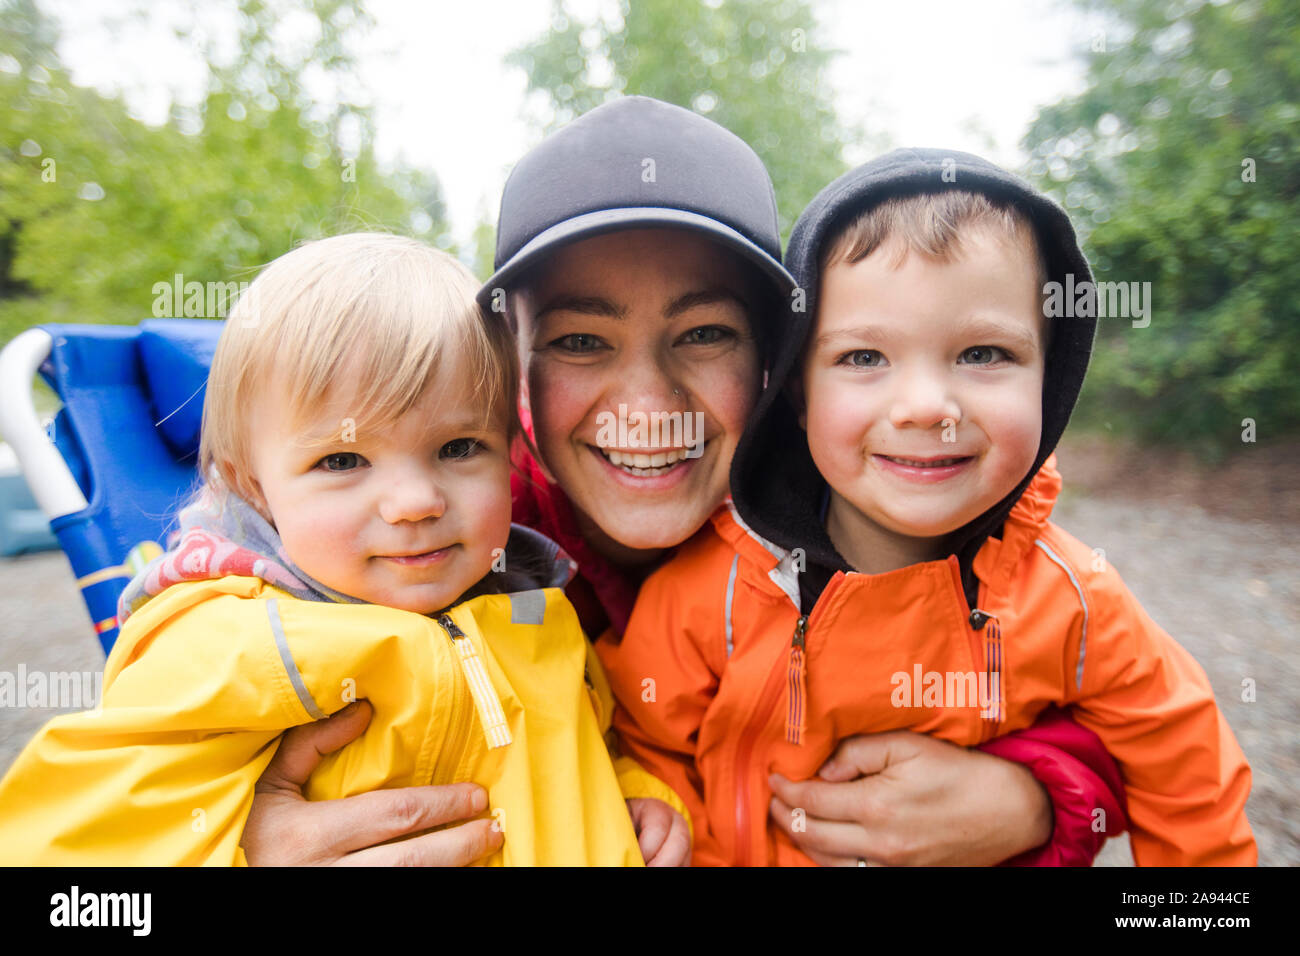 portrait of mother with her two kids with rain jackets on. Stock Photo